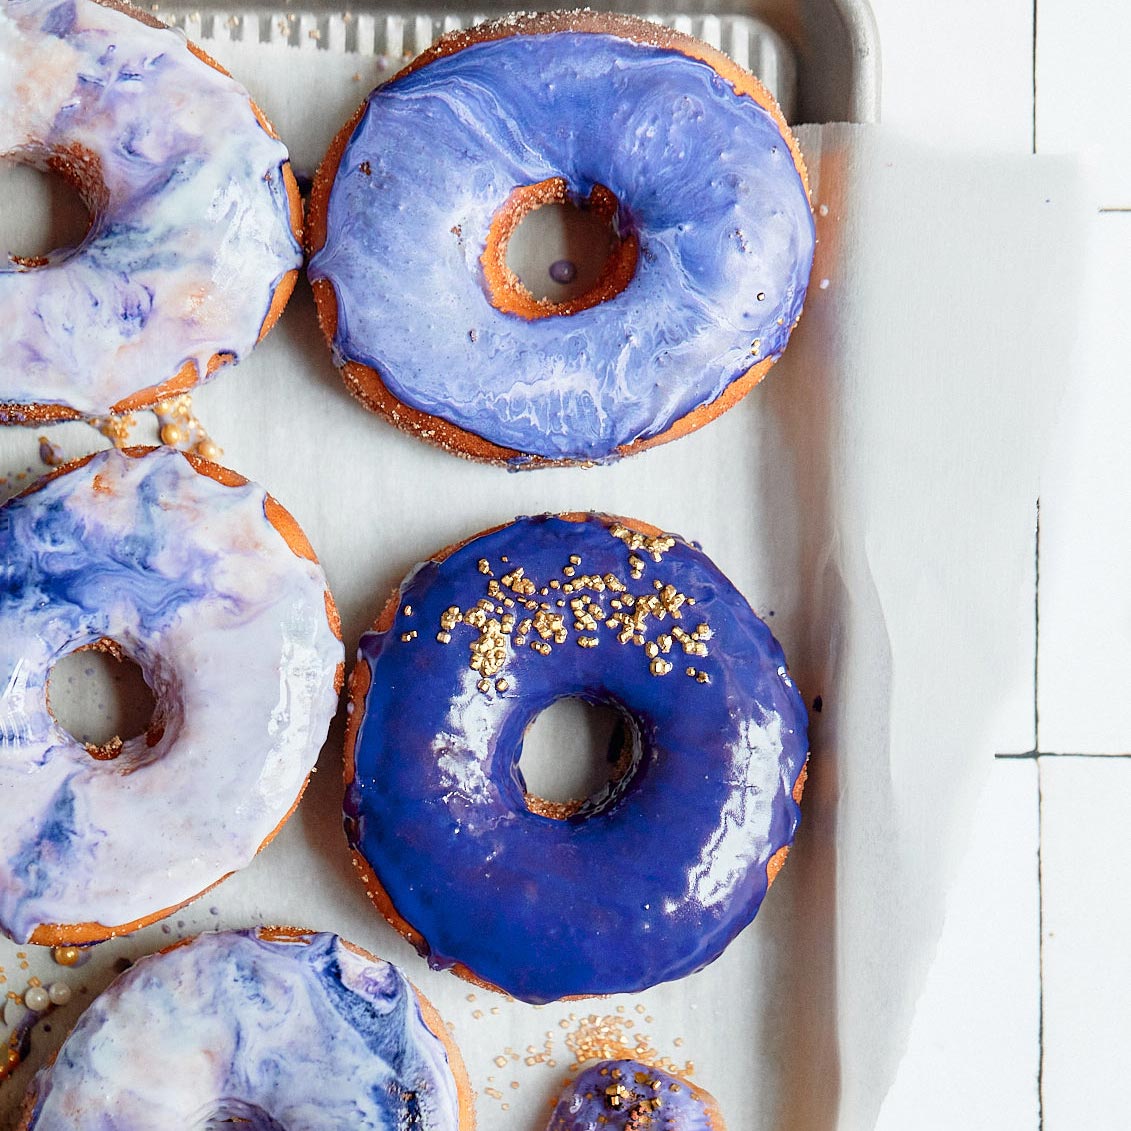 Purple donuts on white parchment paper